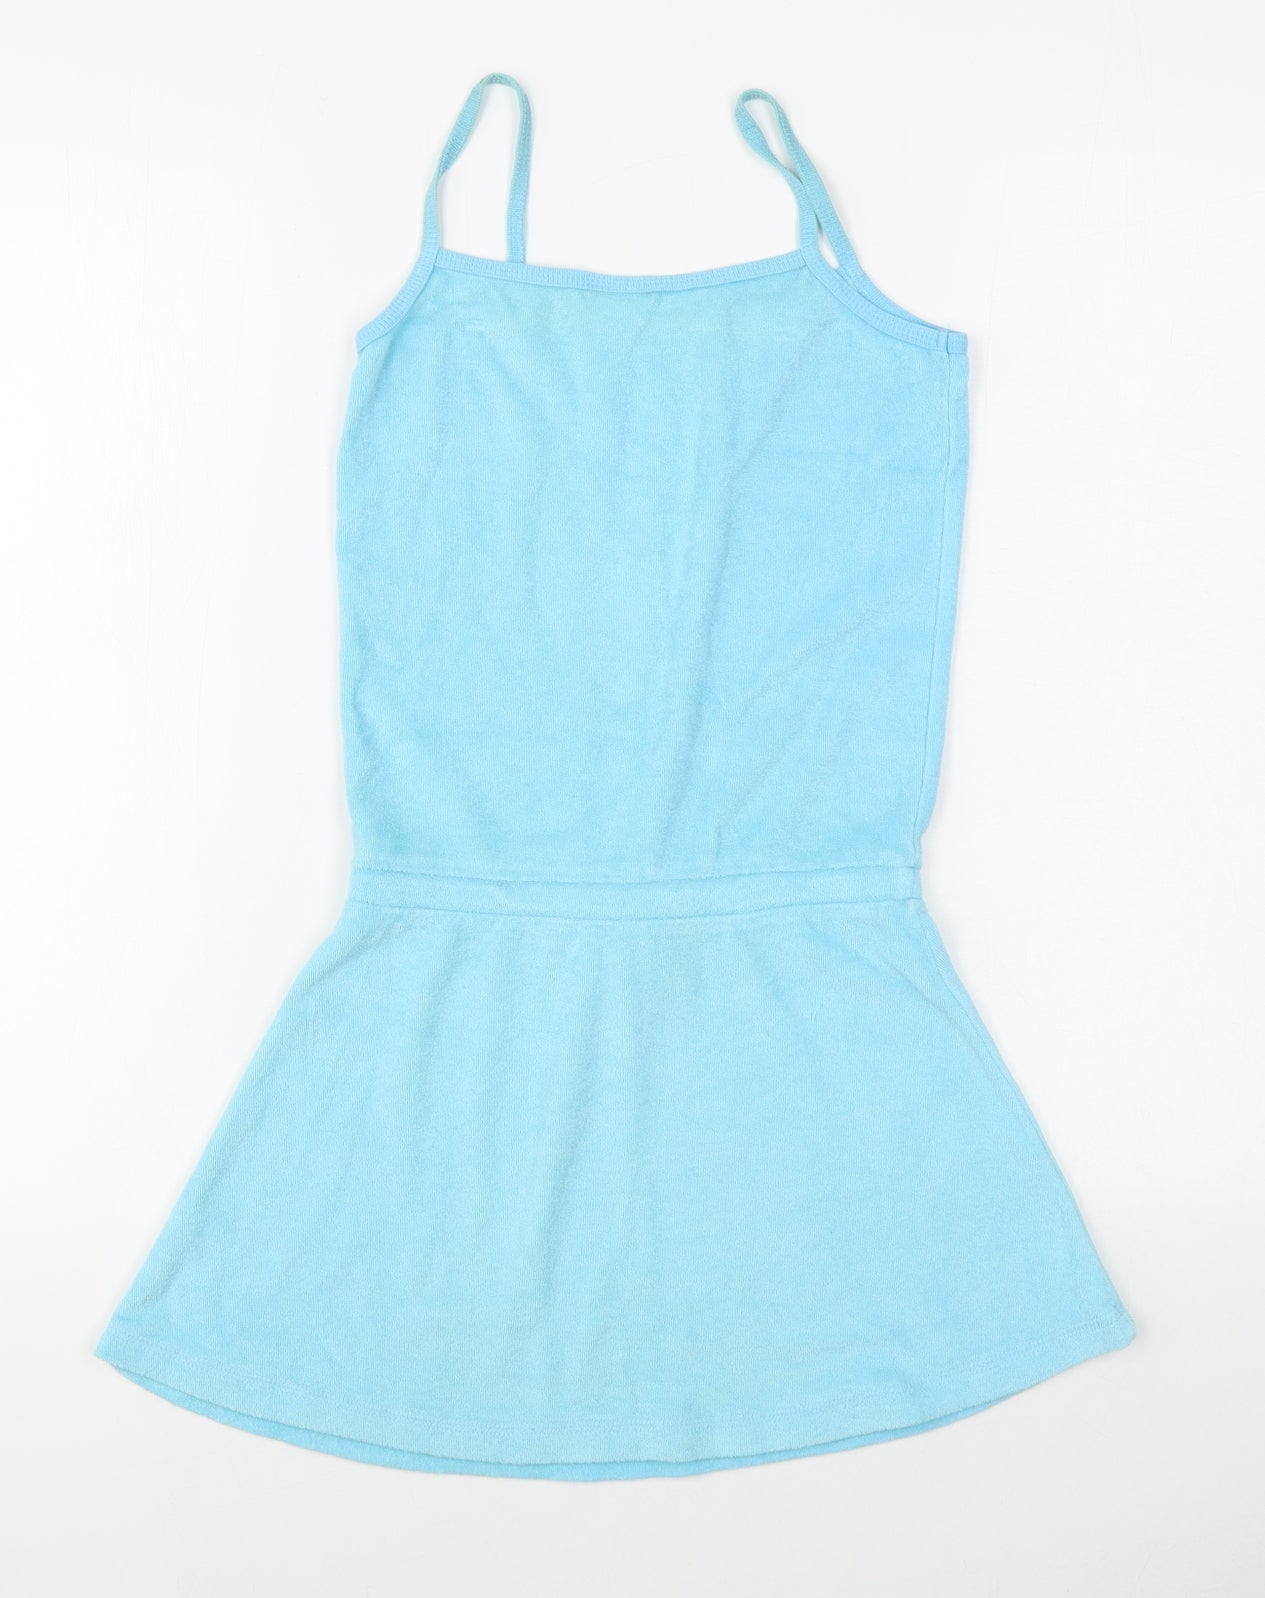 Mackays Girls Blue  Cotton Skater Dress  Size 9-10 Years  Square Neck Pullover